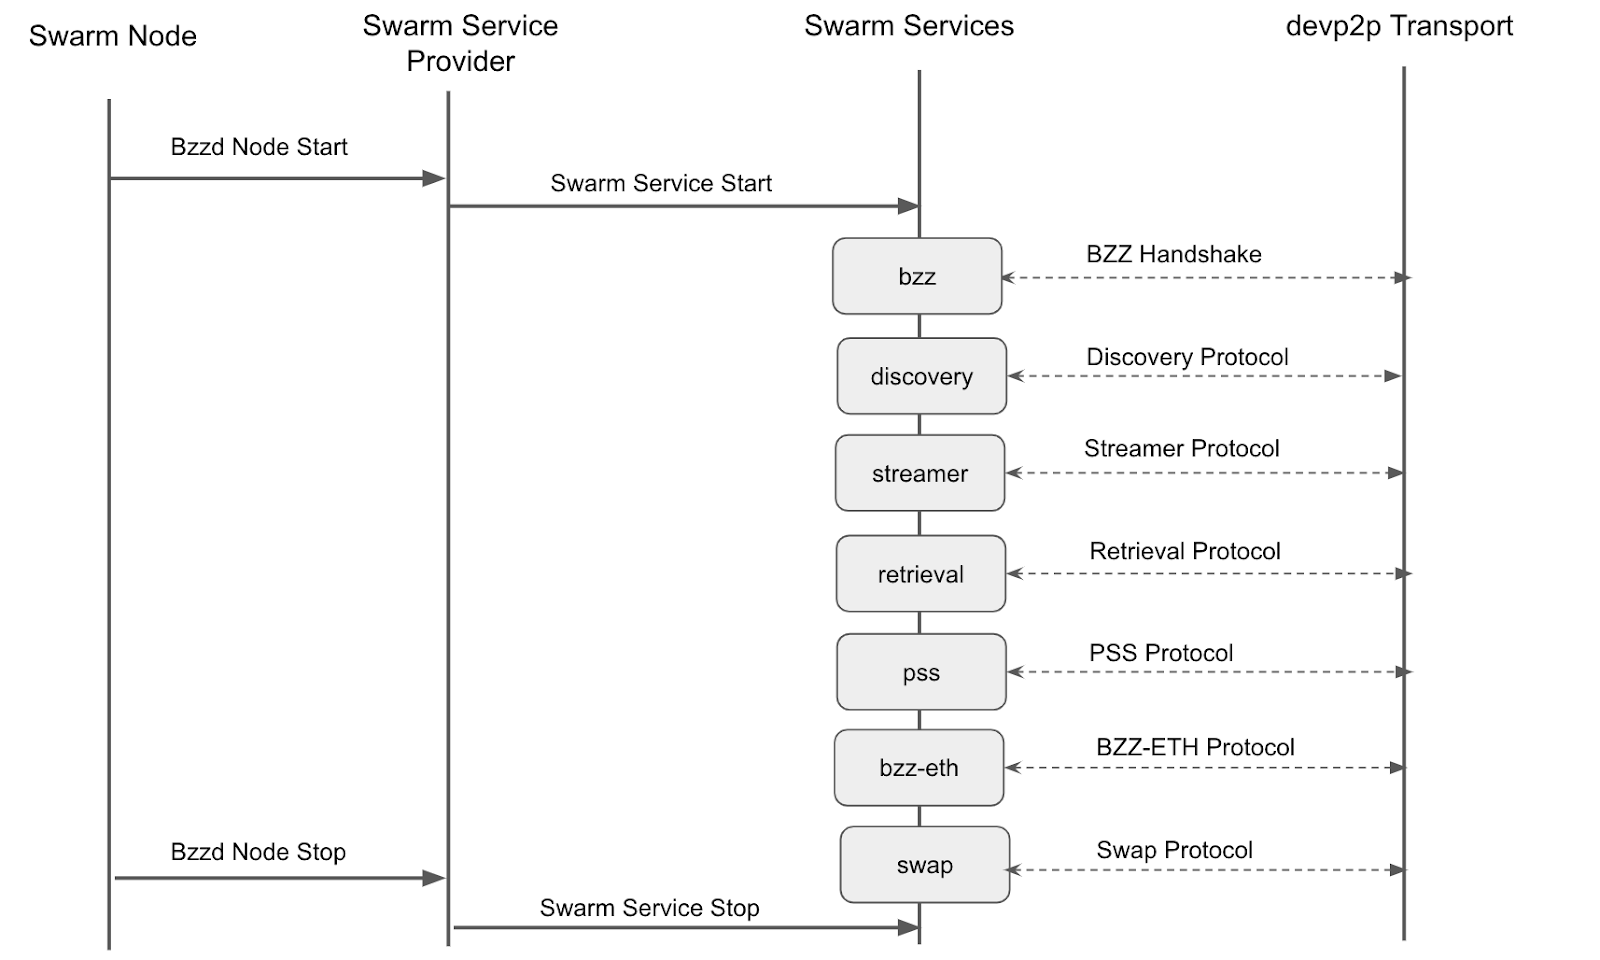 Swarm - Transport and Services